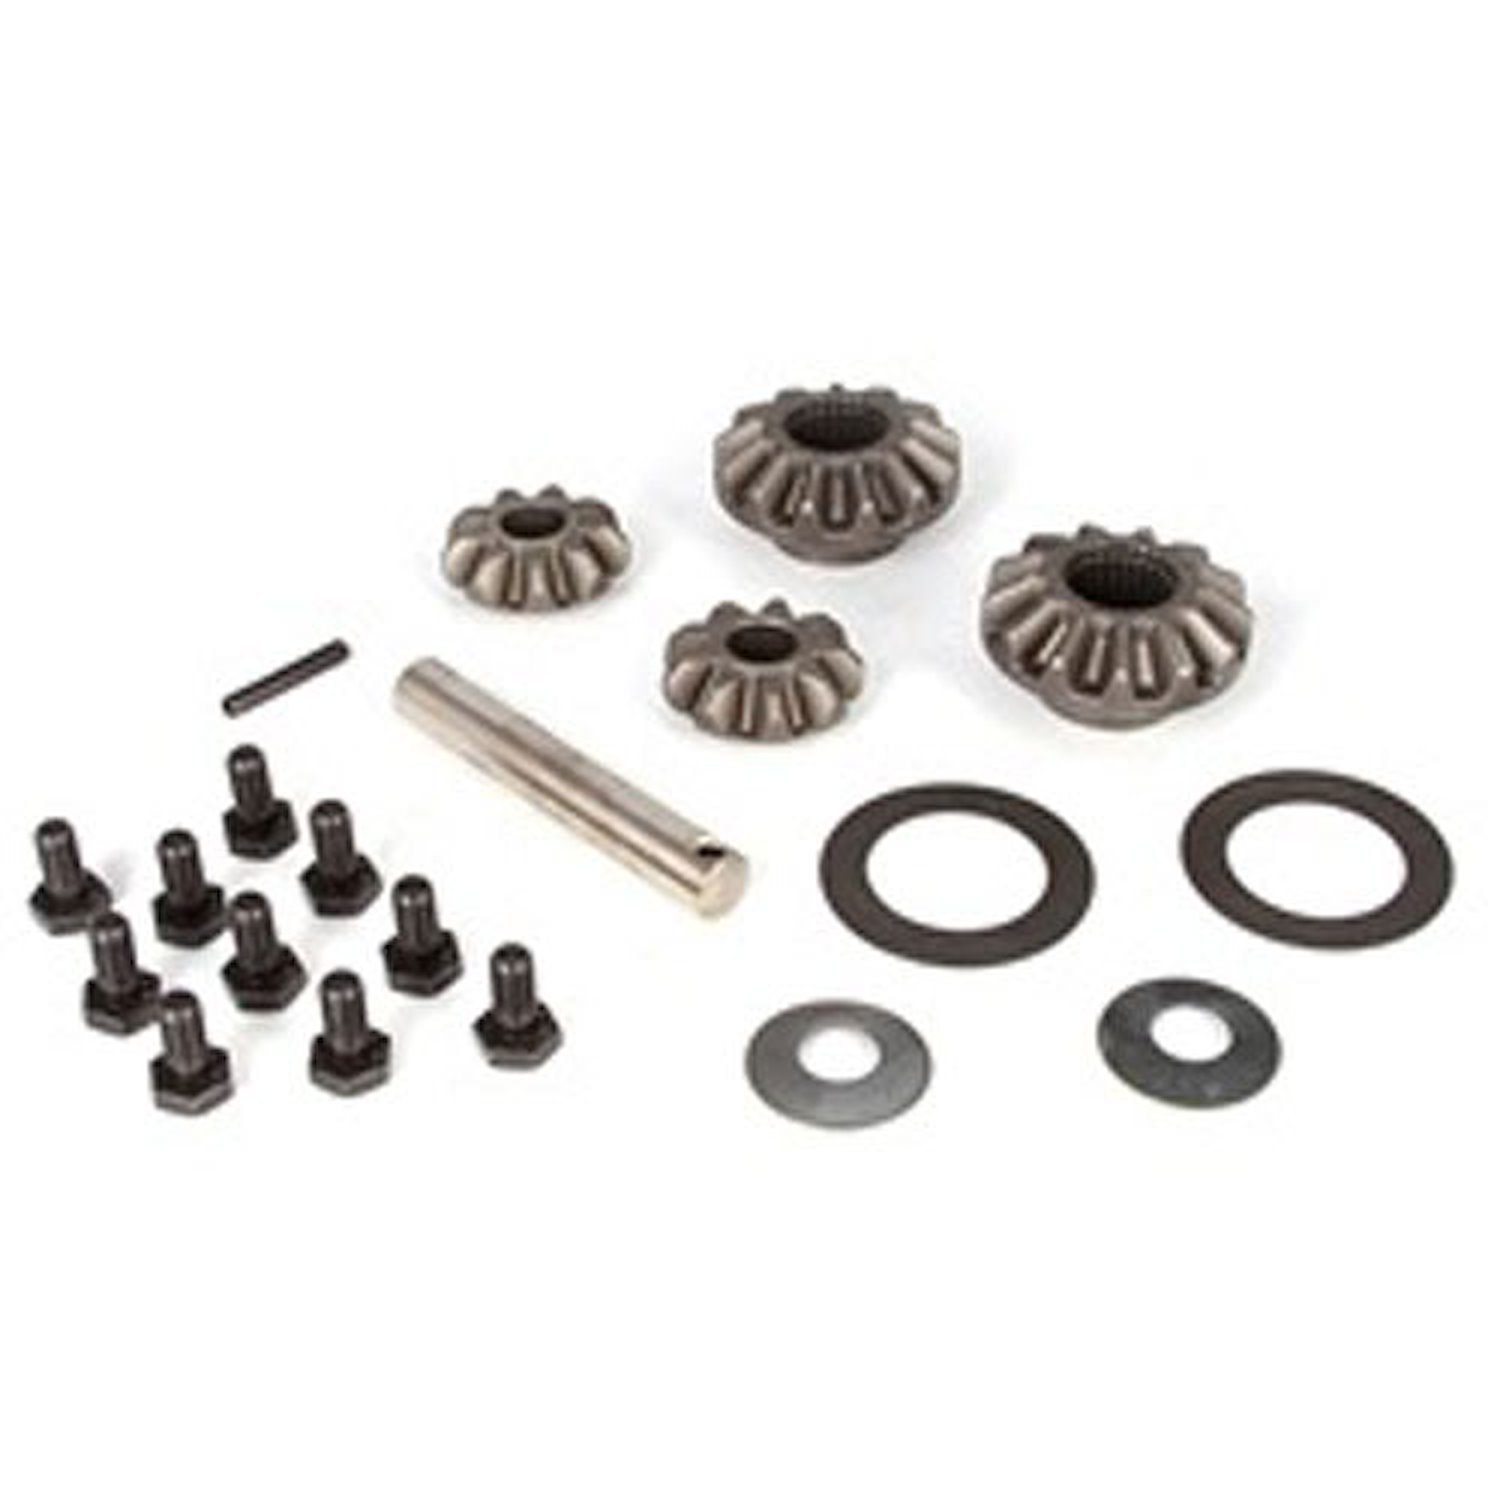 This Front Differential Internal Parts Kit By Omix-ADA Fits 07-16 Jeep Wrangler JK with Dana Super 30 Front Axle